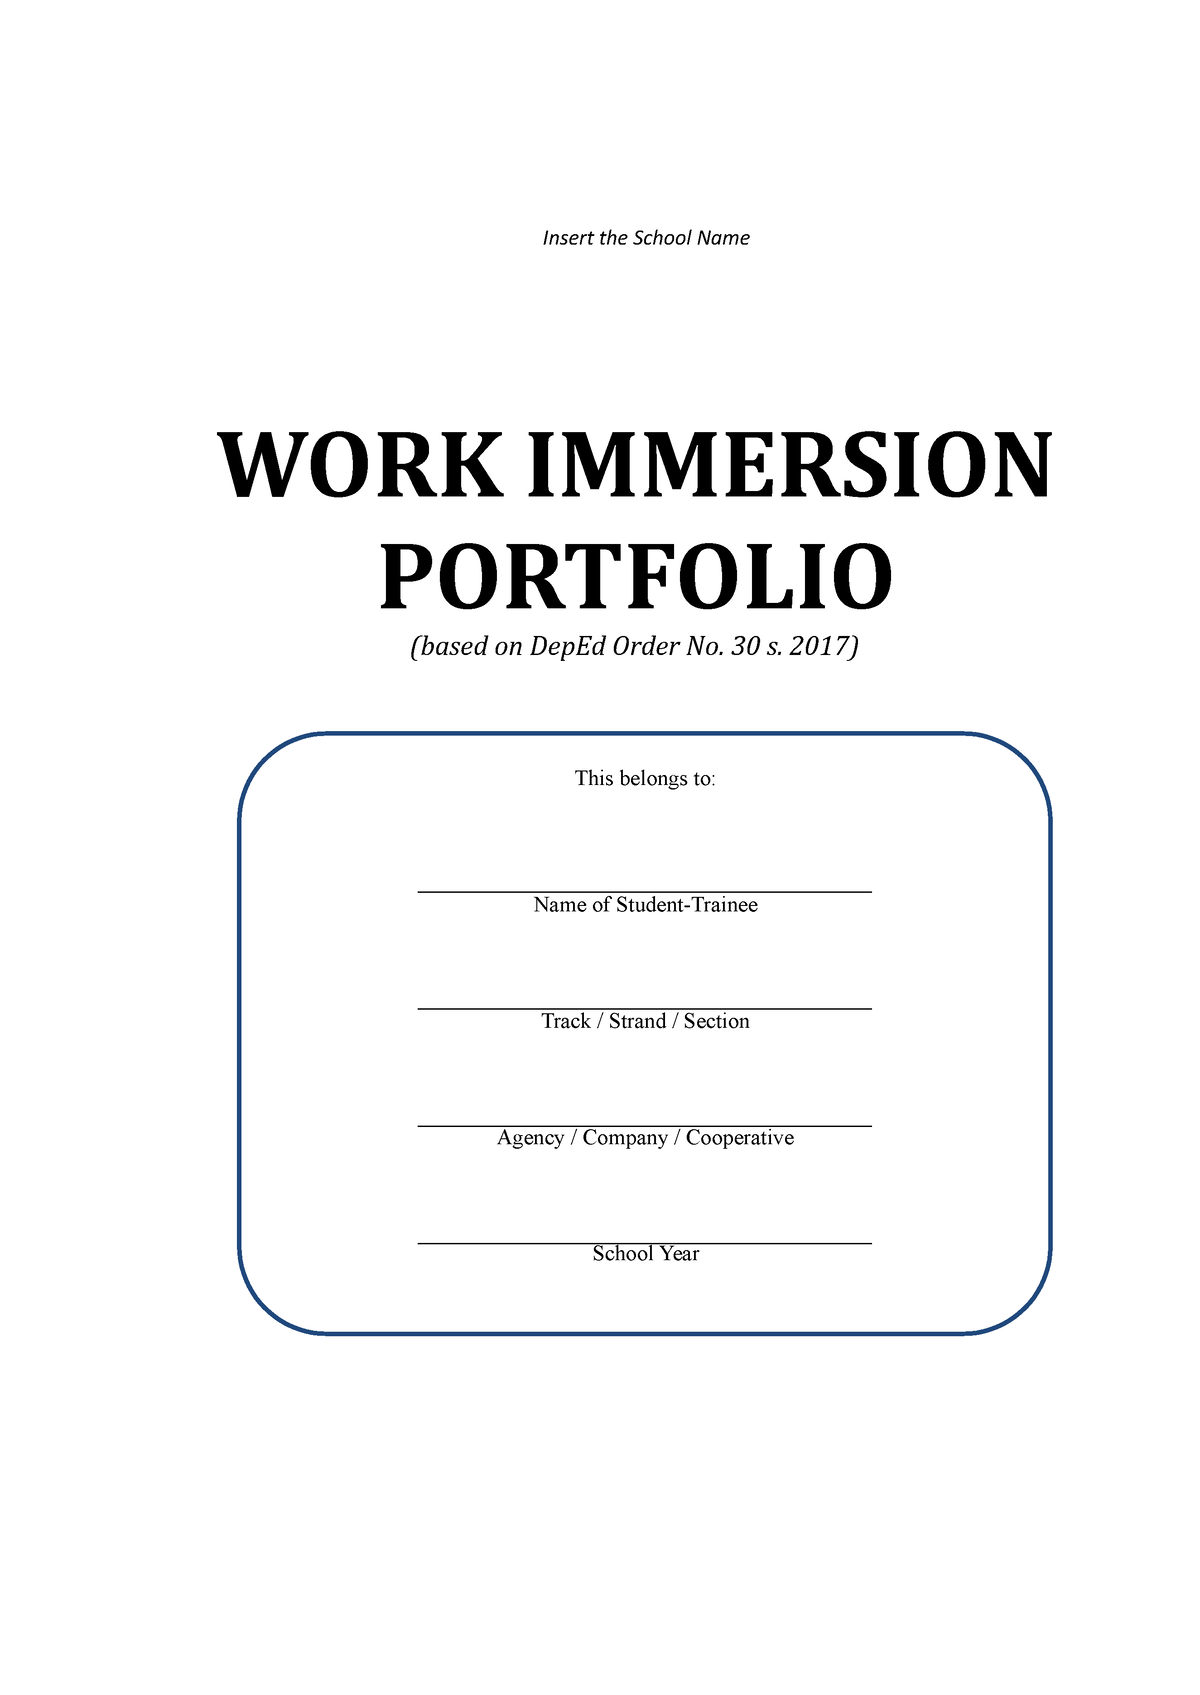 research design about work immersion